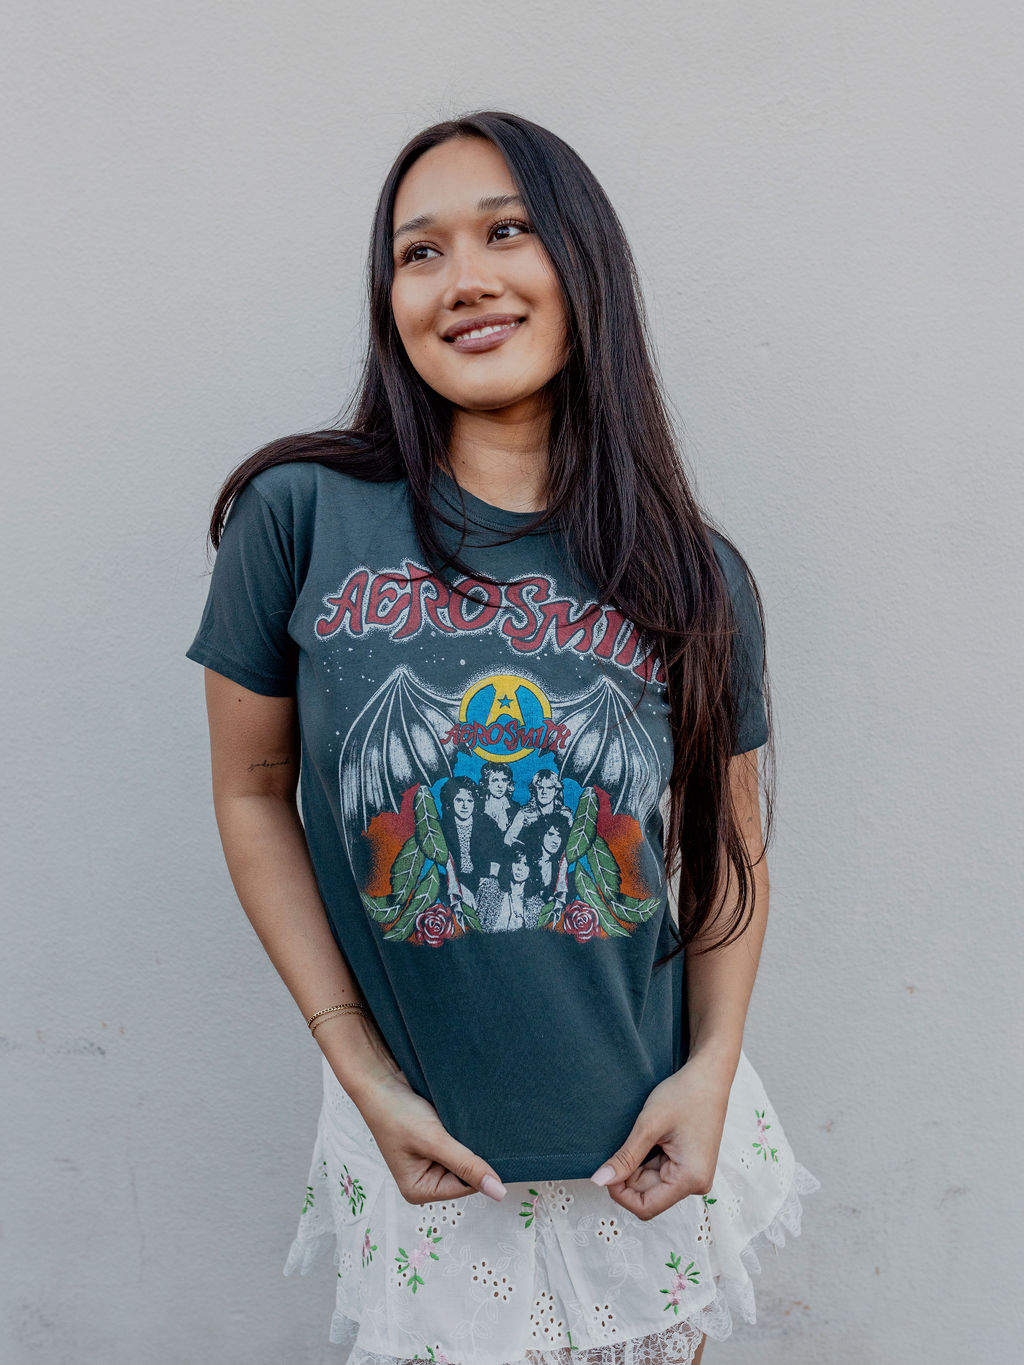 AEROSMITH BACK IN THE SADDLE RINGER TEE BY DAYDREAMER